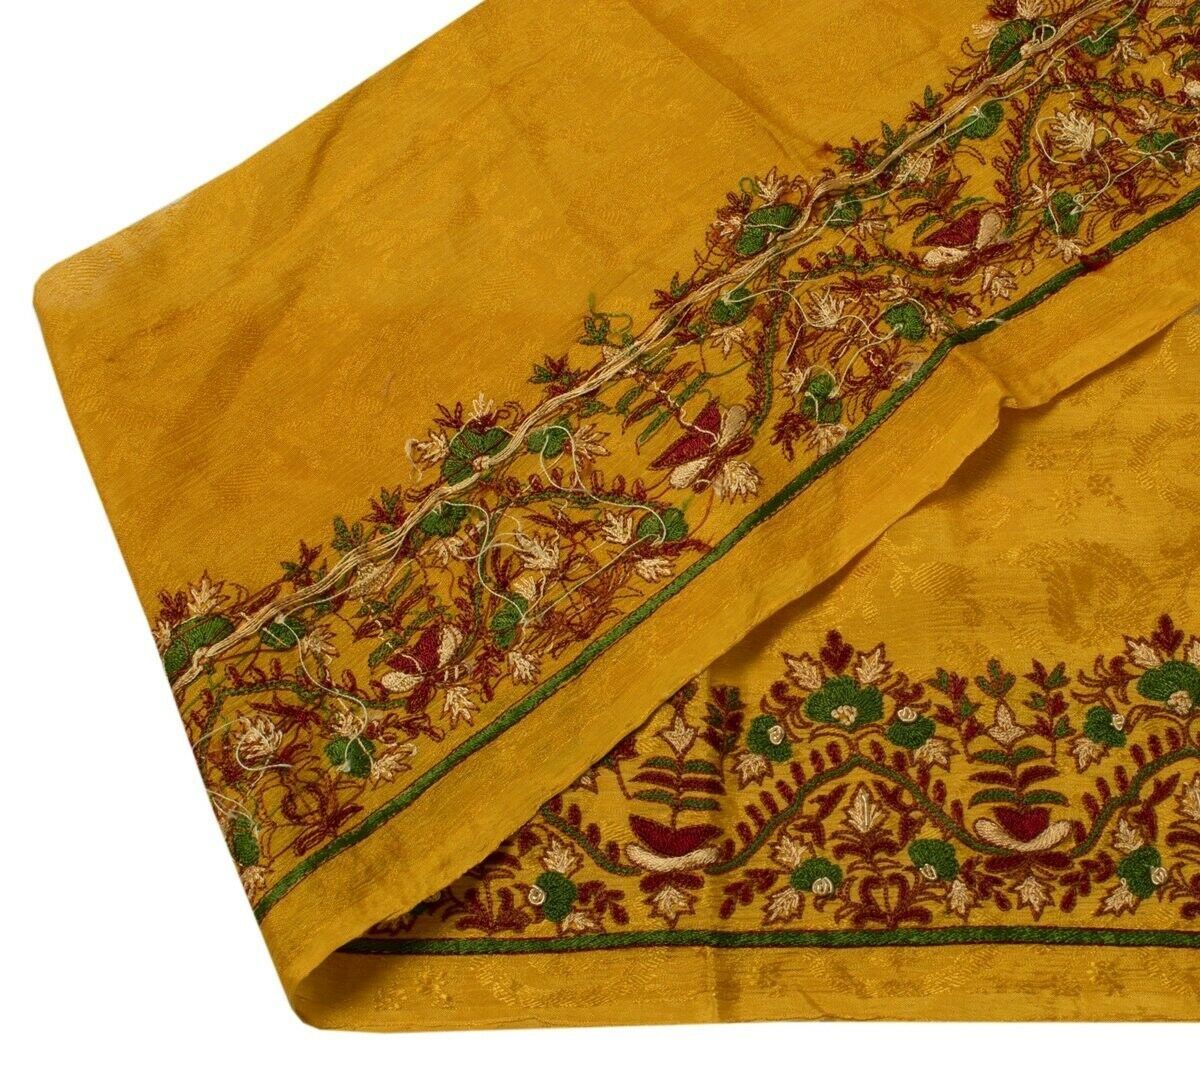 Vintage Sari Border Indian Craft Sewing Trim Hand Embroidered Golden Ribbon Lace